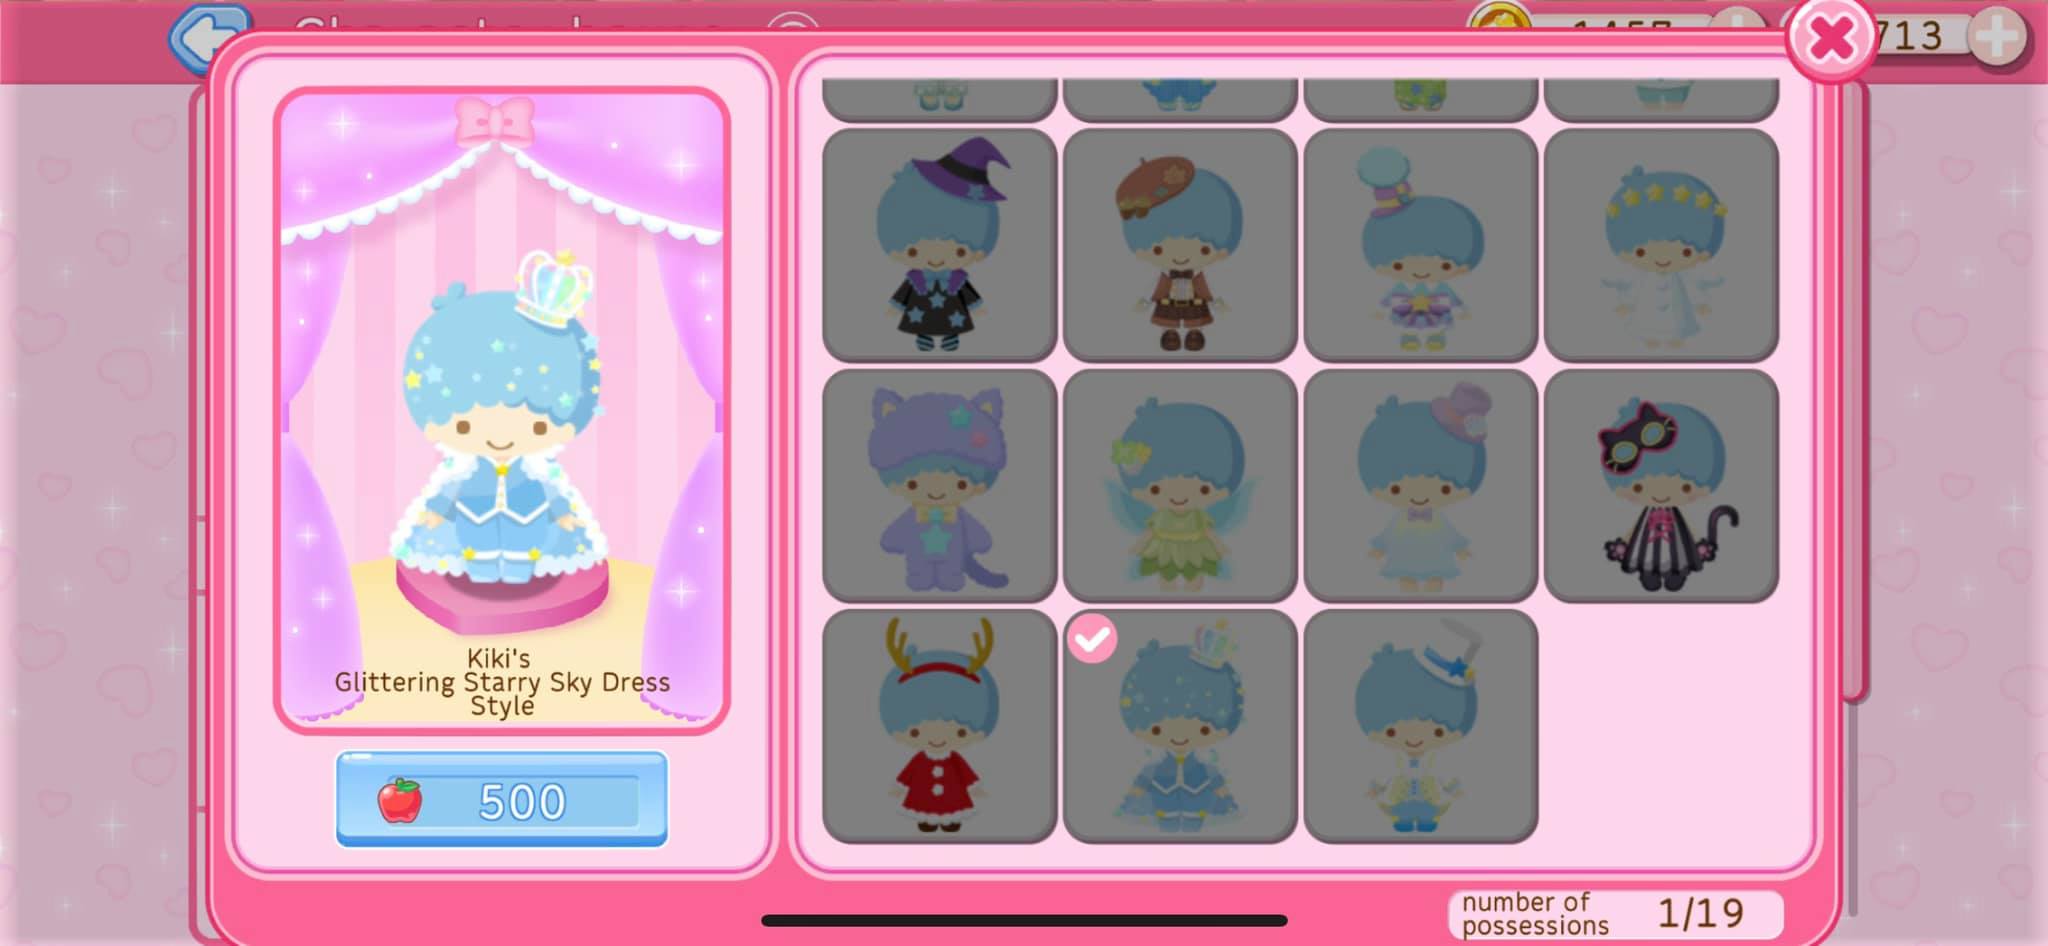 Hello Kitty Games - Buy Hello Kitty Games and Game Set Online in